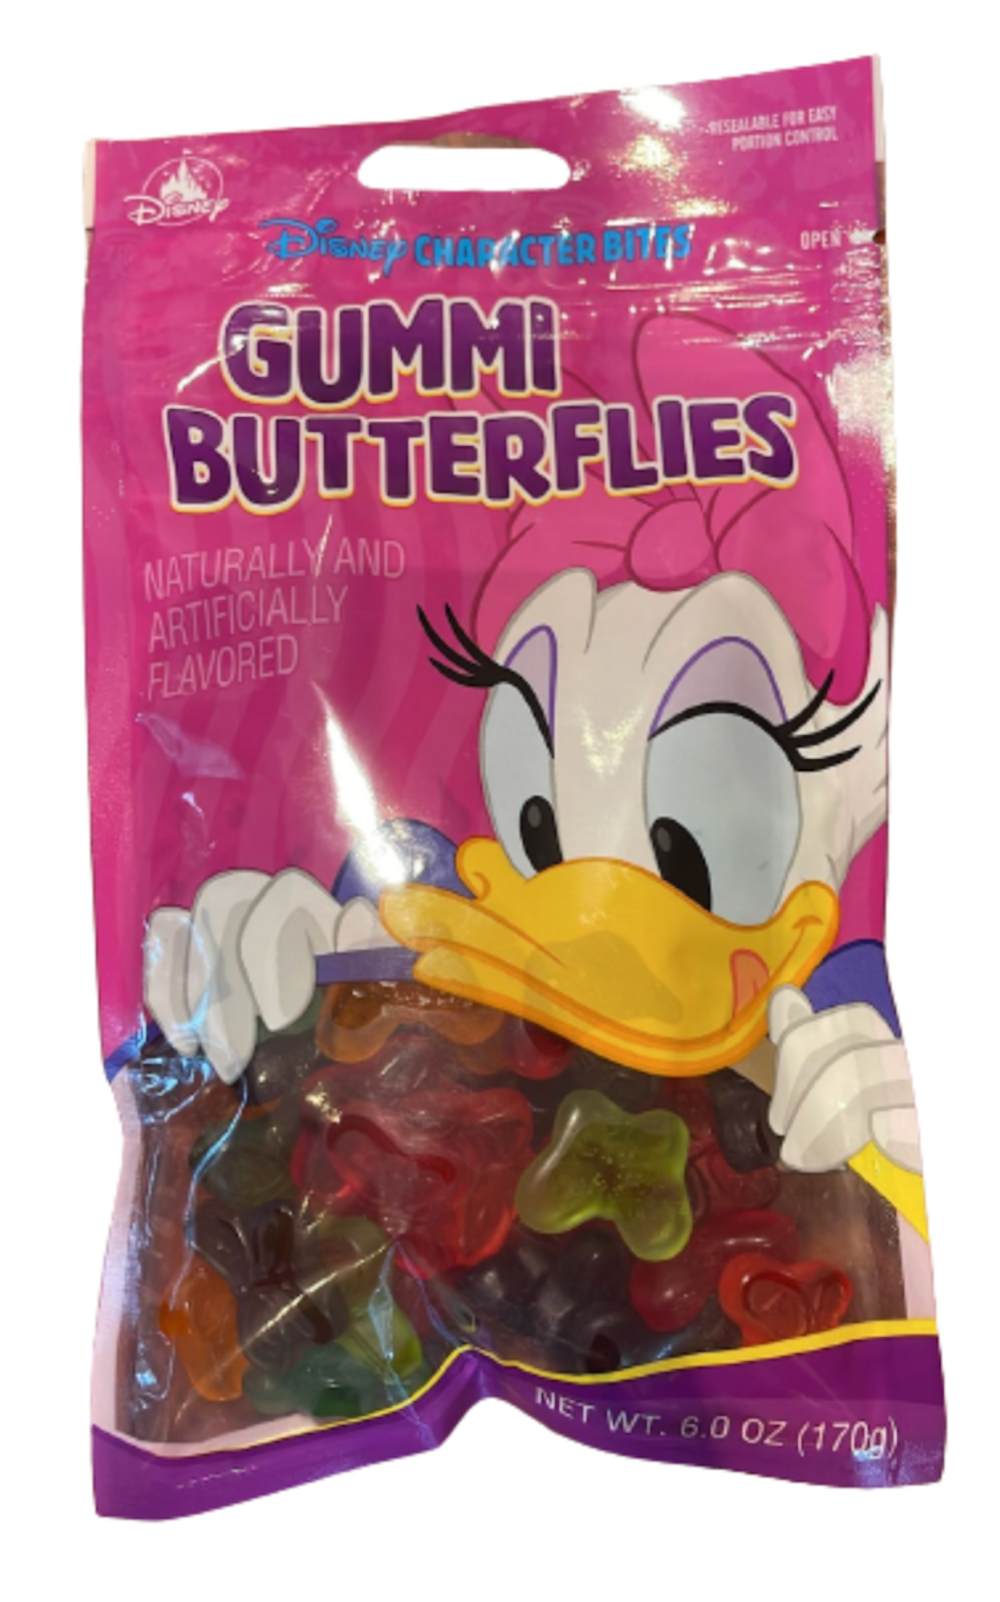 Disney Parks Gummi Butterflies Disney Characters Fun to Share 6 OZ New Sealed